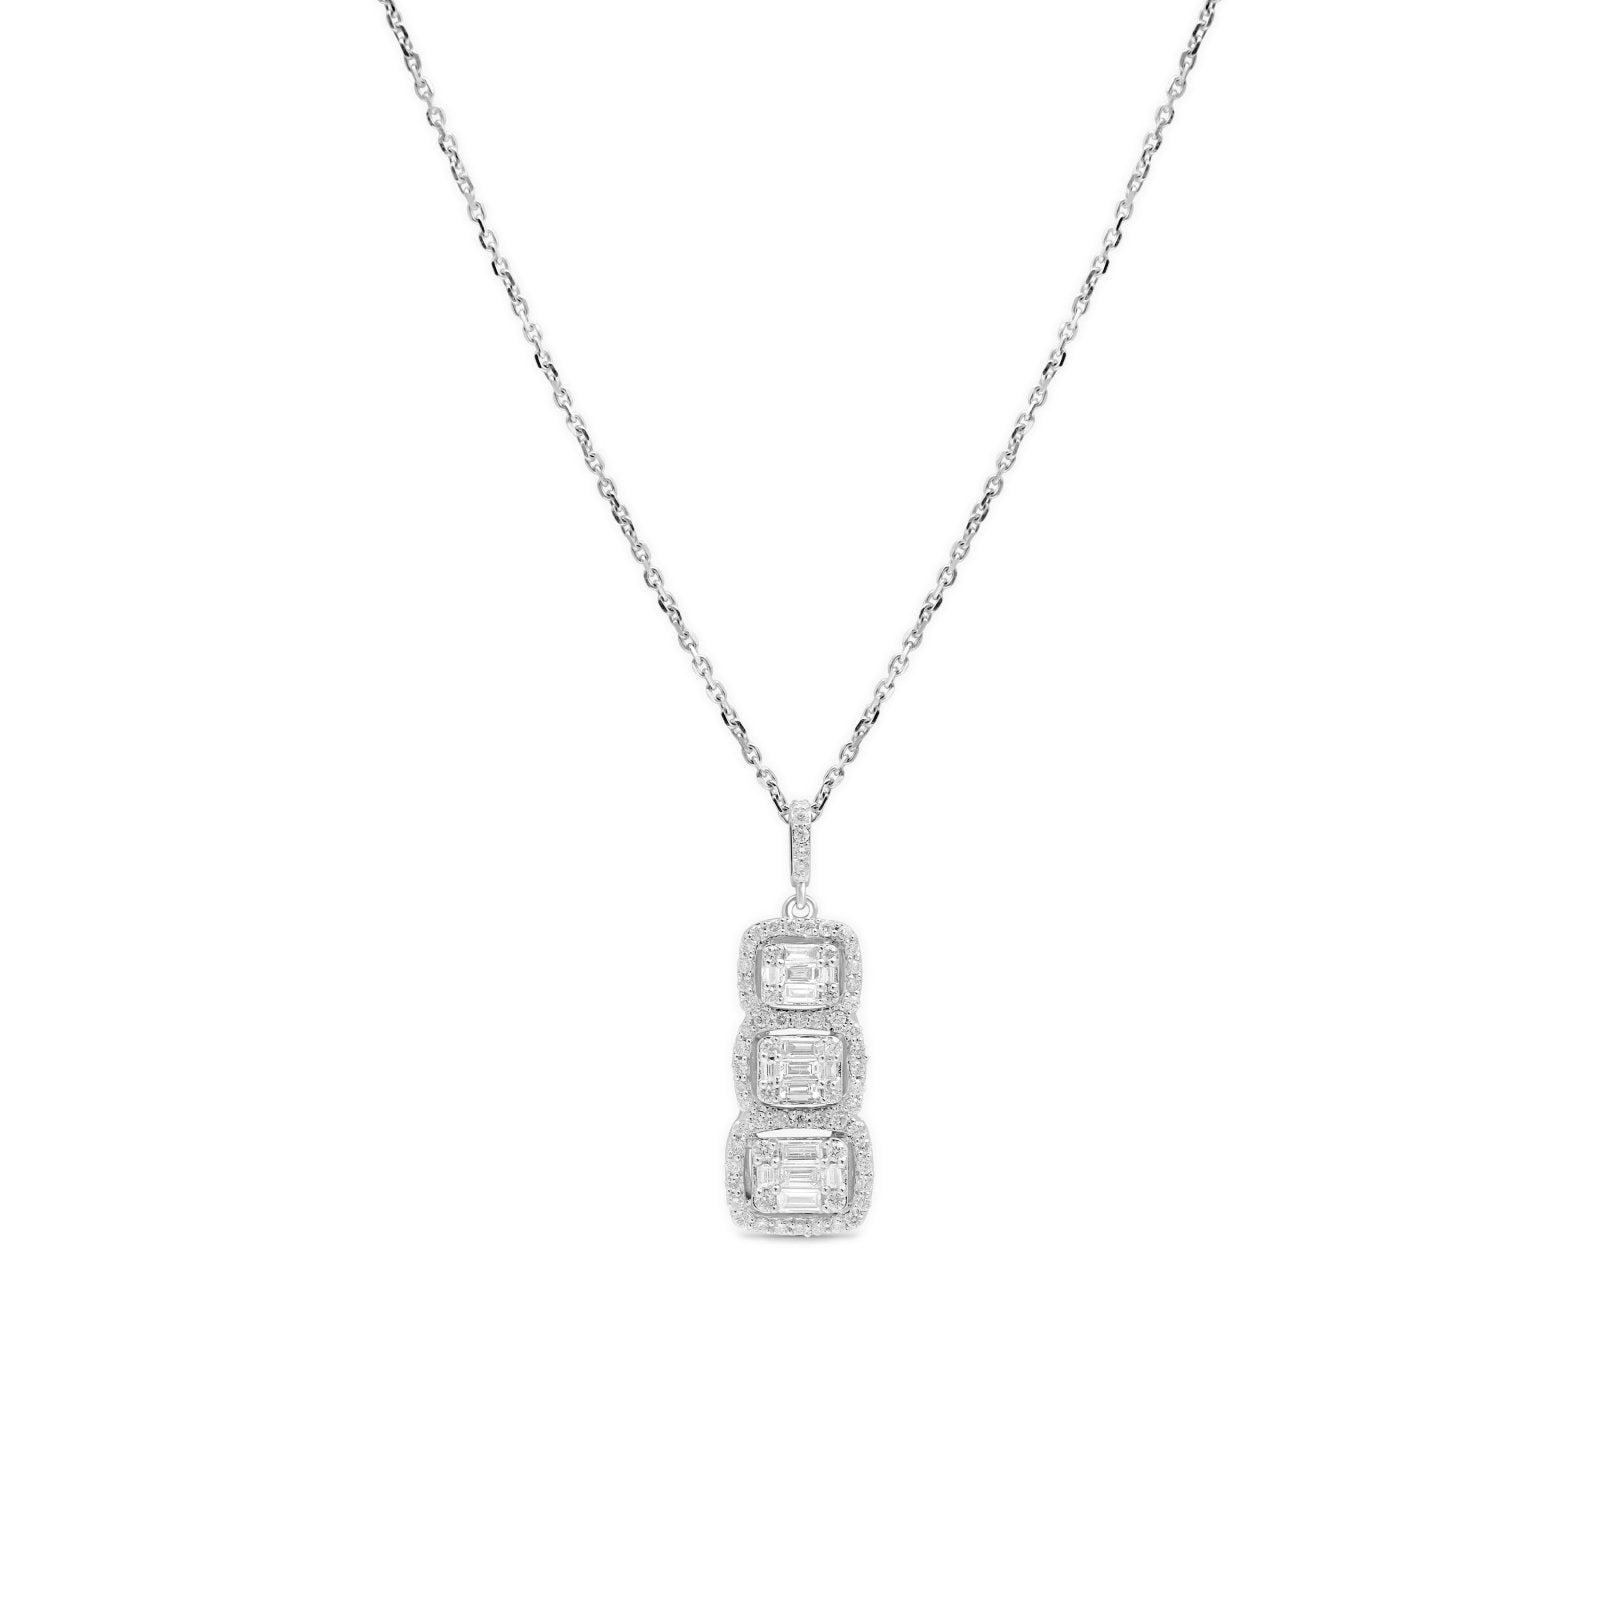 Triple Stacked Diamond Halo Baguettes in Solid 18k White Gold Necklaces Estella Collection #product_description# 18k Diamond Gemstone #tag4# #tag5# #tag6# #tag7# #tag8# #tag9# #tag10#